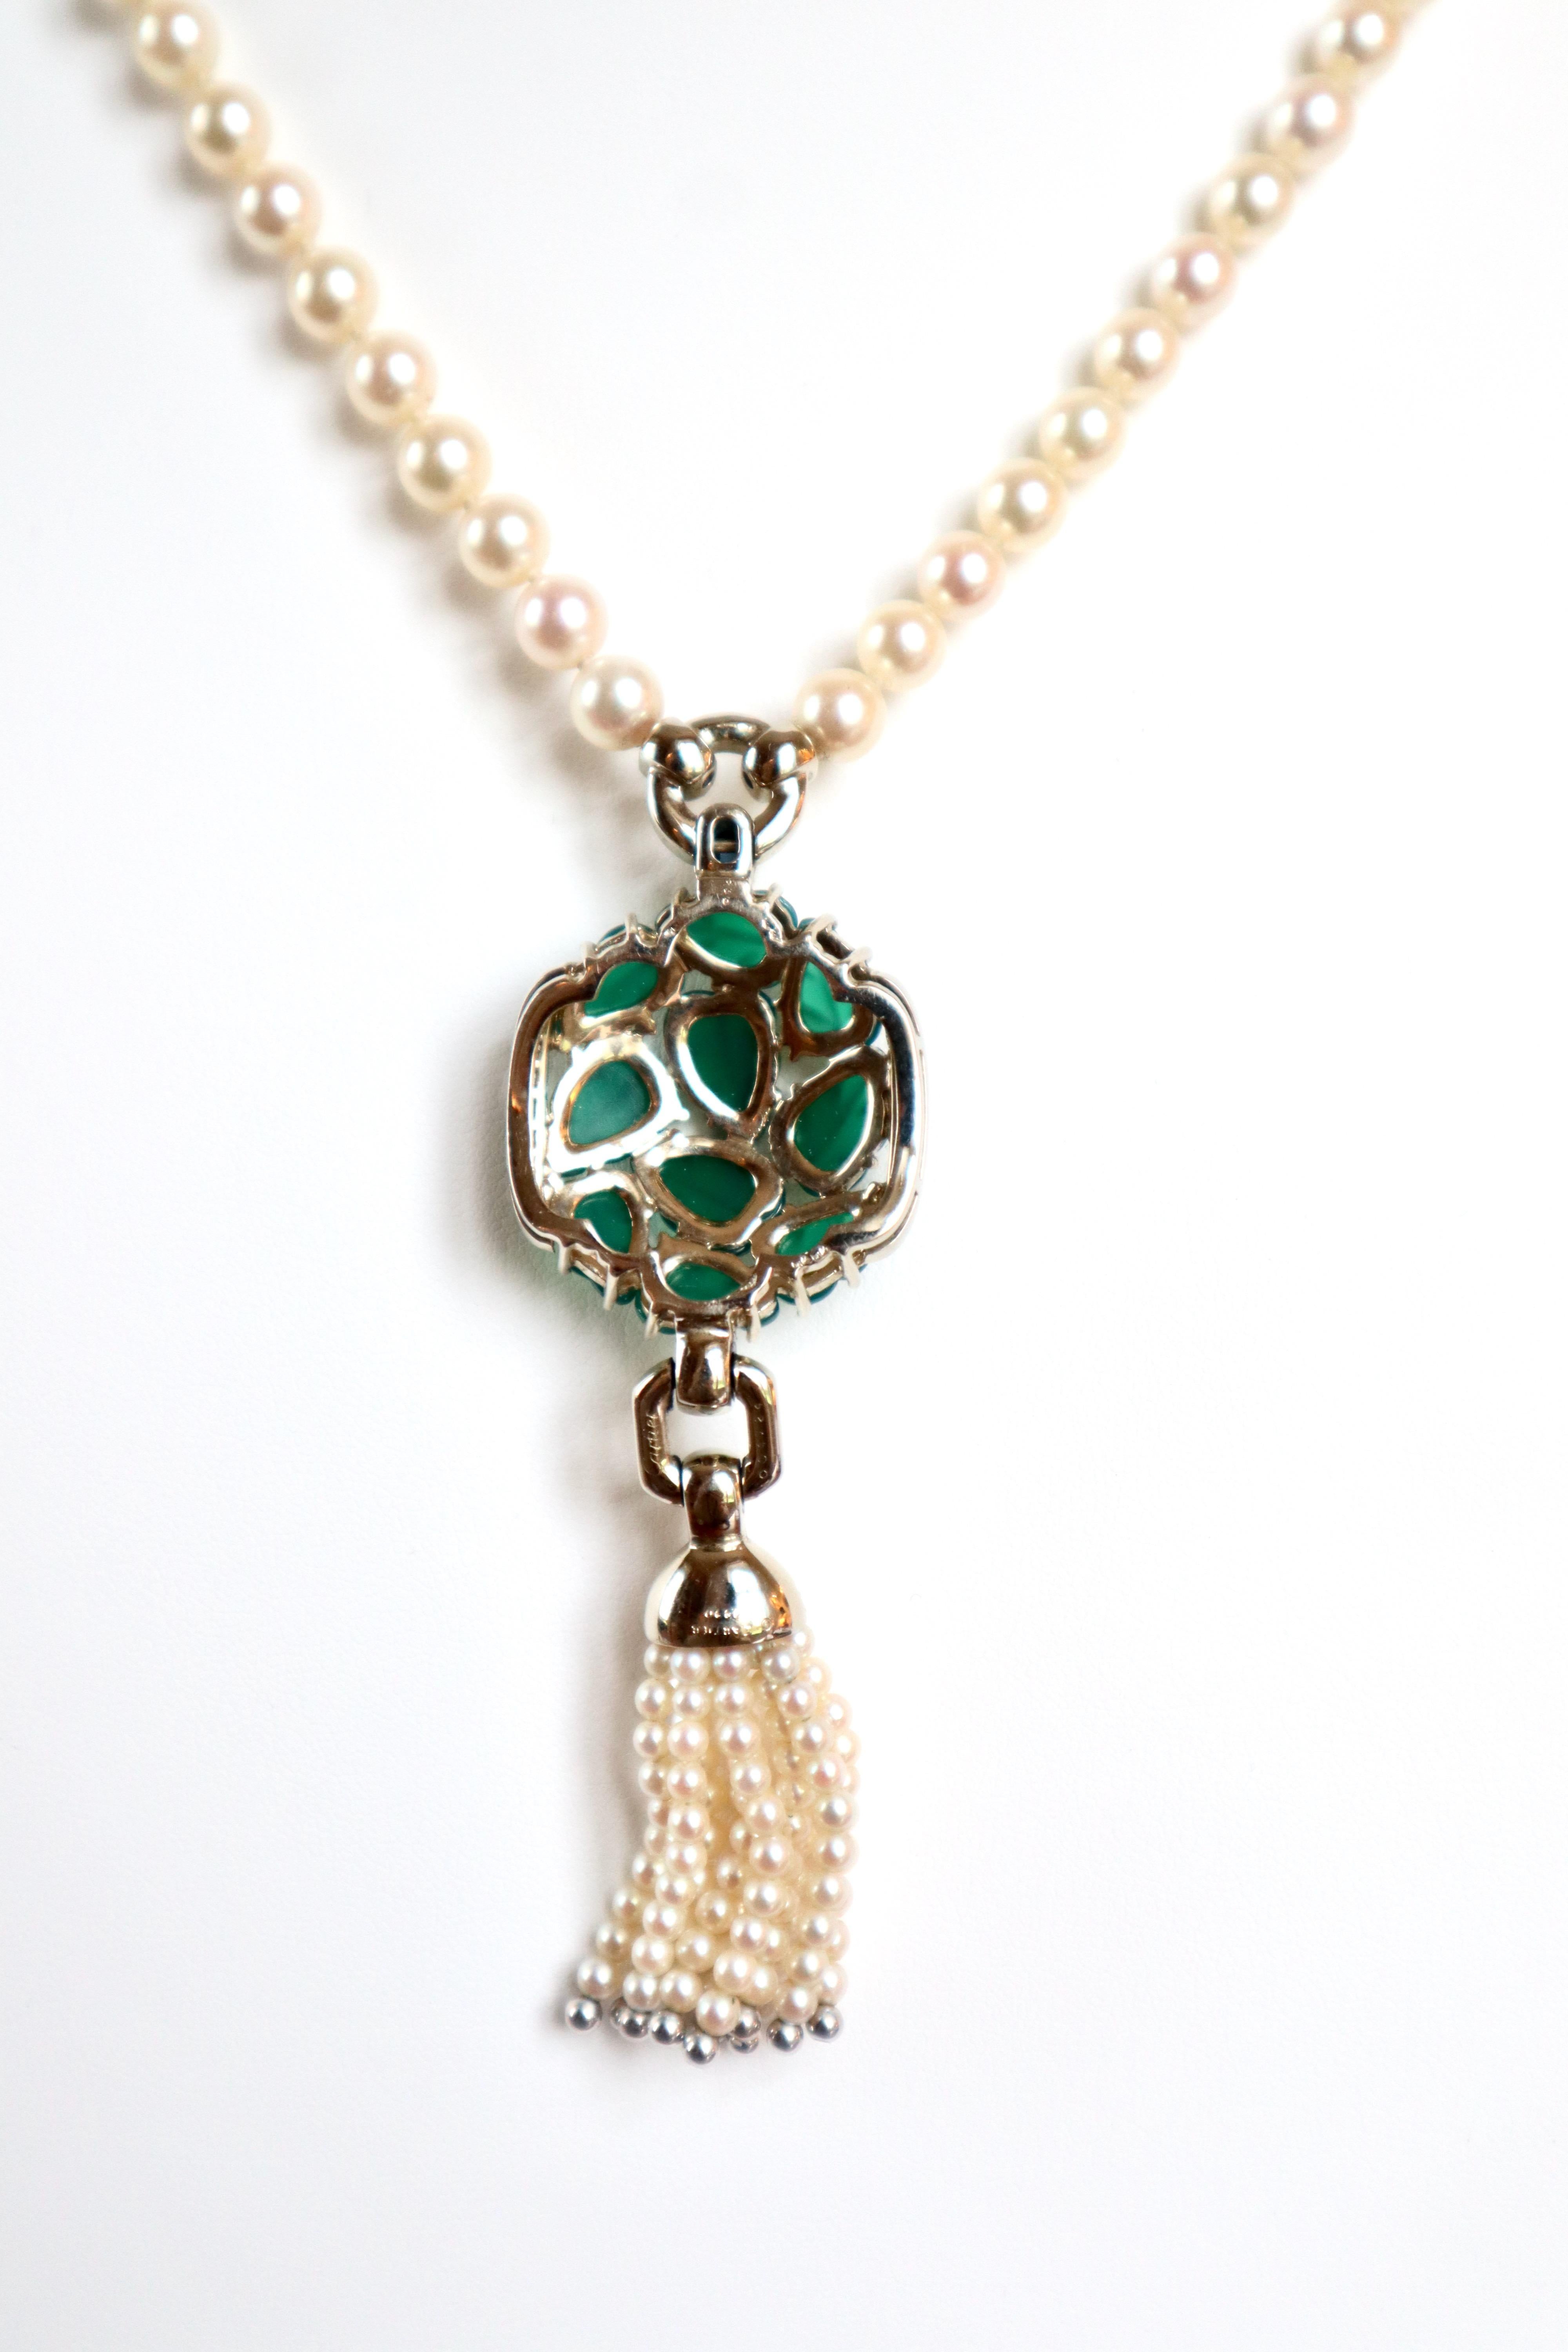 Cartier Necklace Pearls and Chrysoprases White Gold 18 KT 3